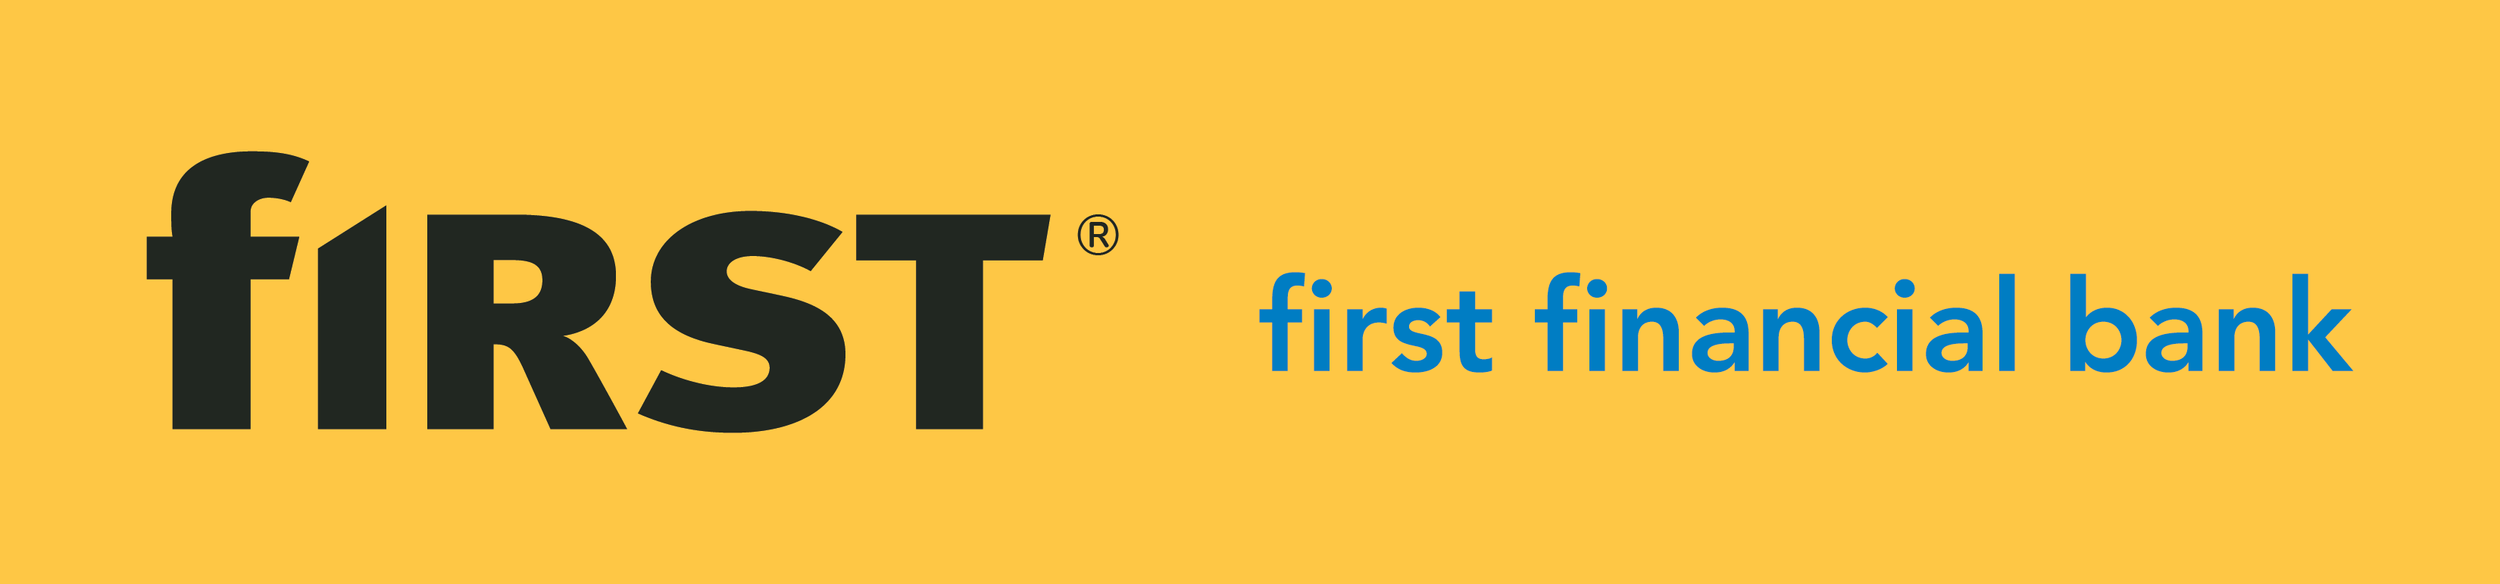 First Financial Bank_Yellow Background_Horizontal.png